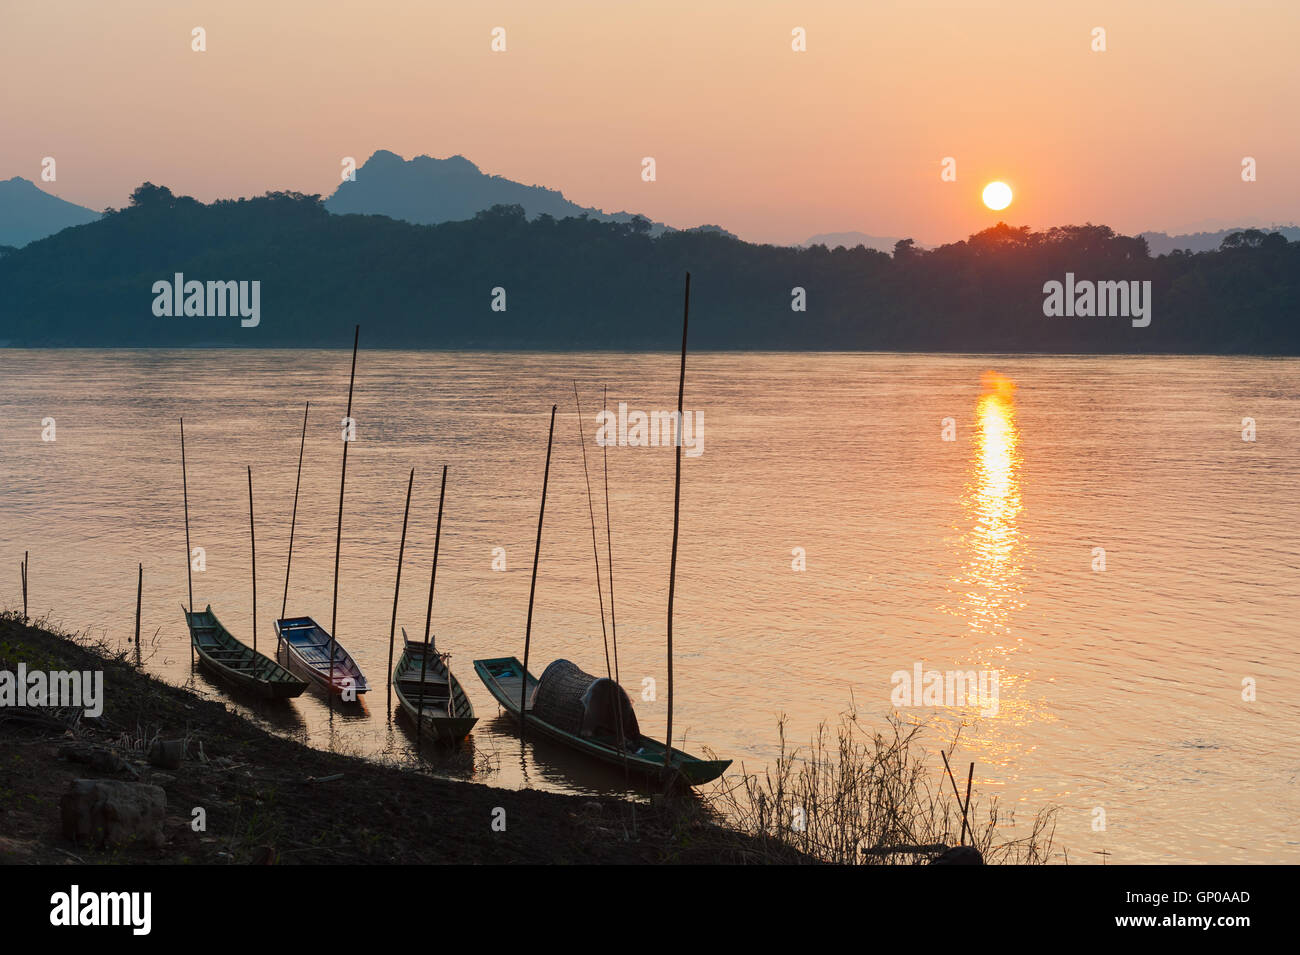 Boats on the river in sunrise or sunset at Luang Prabang, Laos. Stock Photo